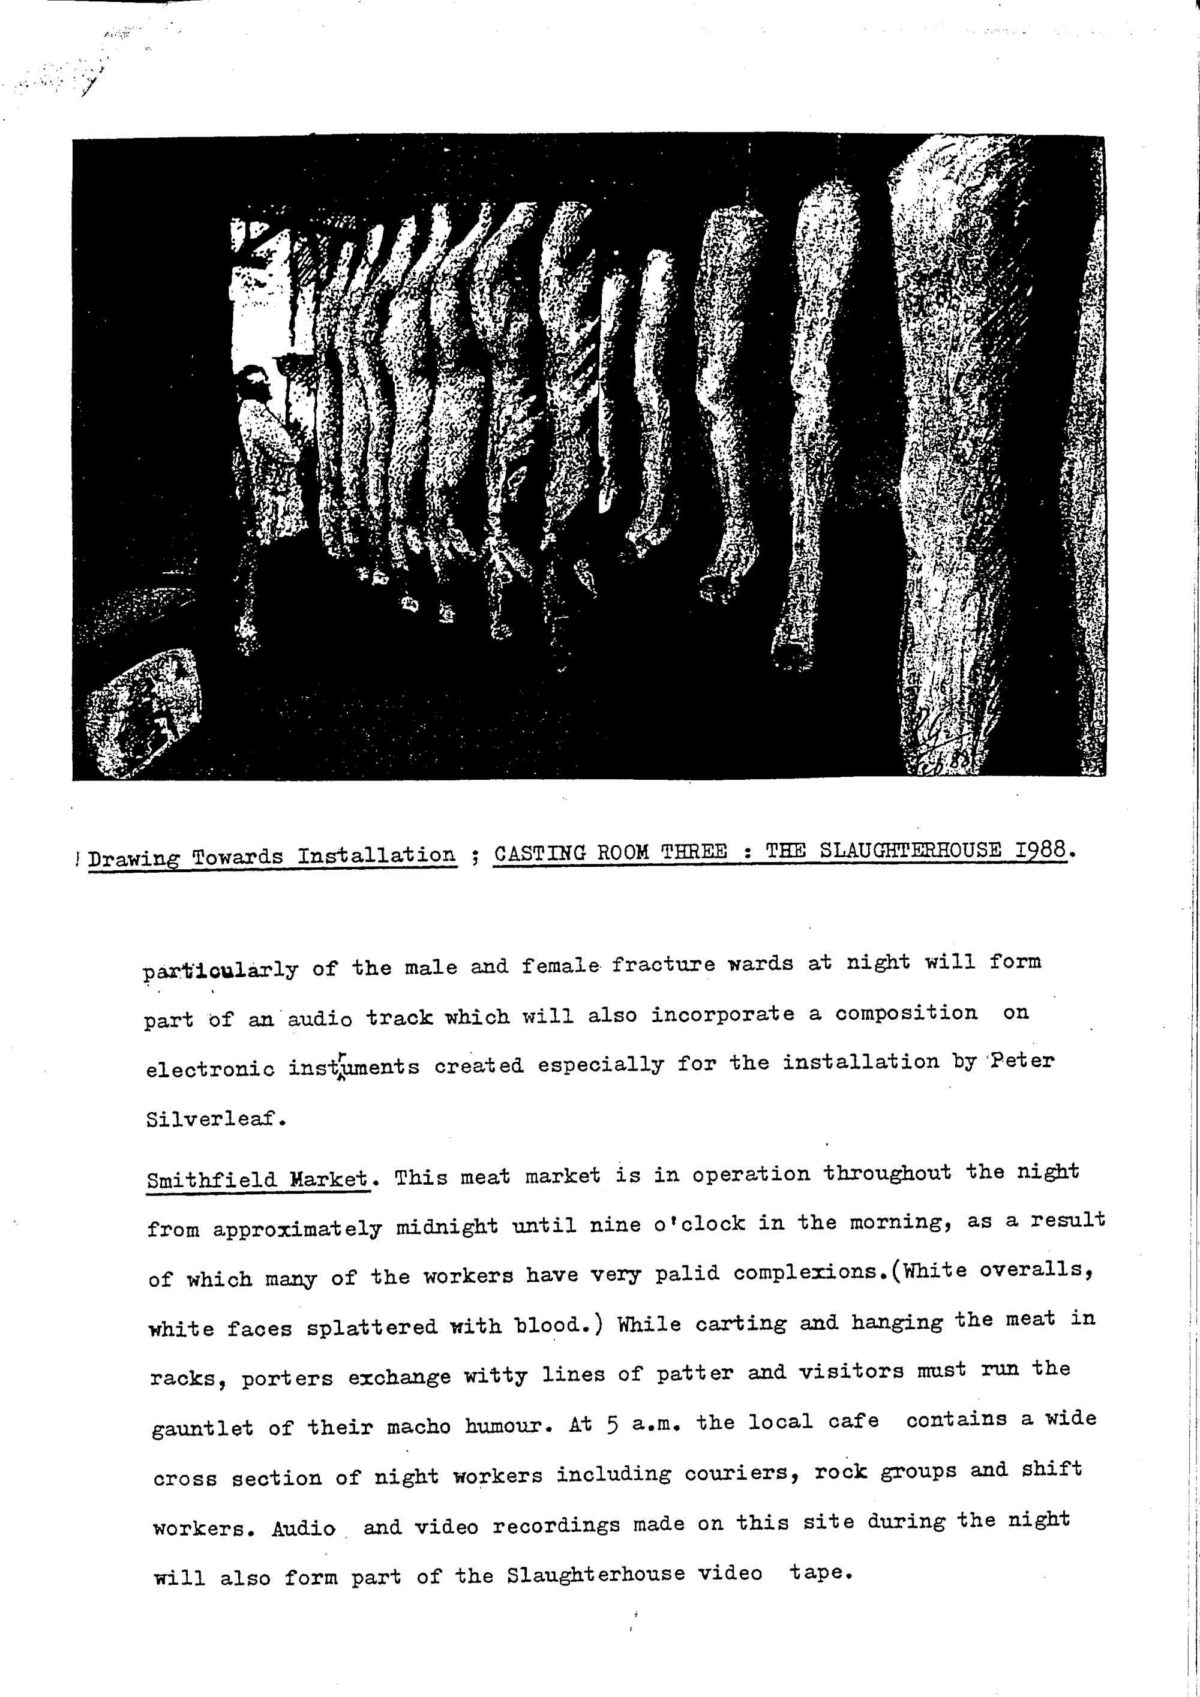 Rose Garrard, Proposal Provisional Title 'Casting Room Three: The Slaughterhouse' 2, 1988 (Page 3 of 4)